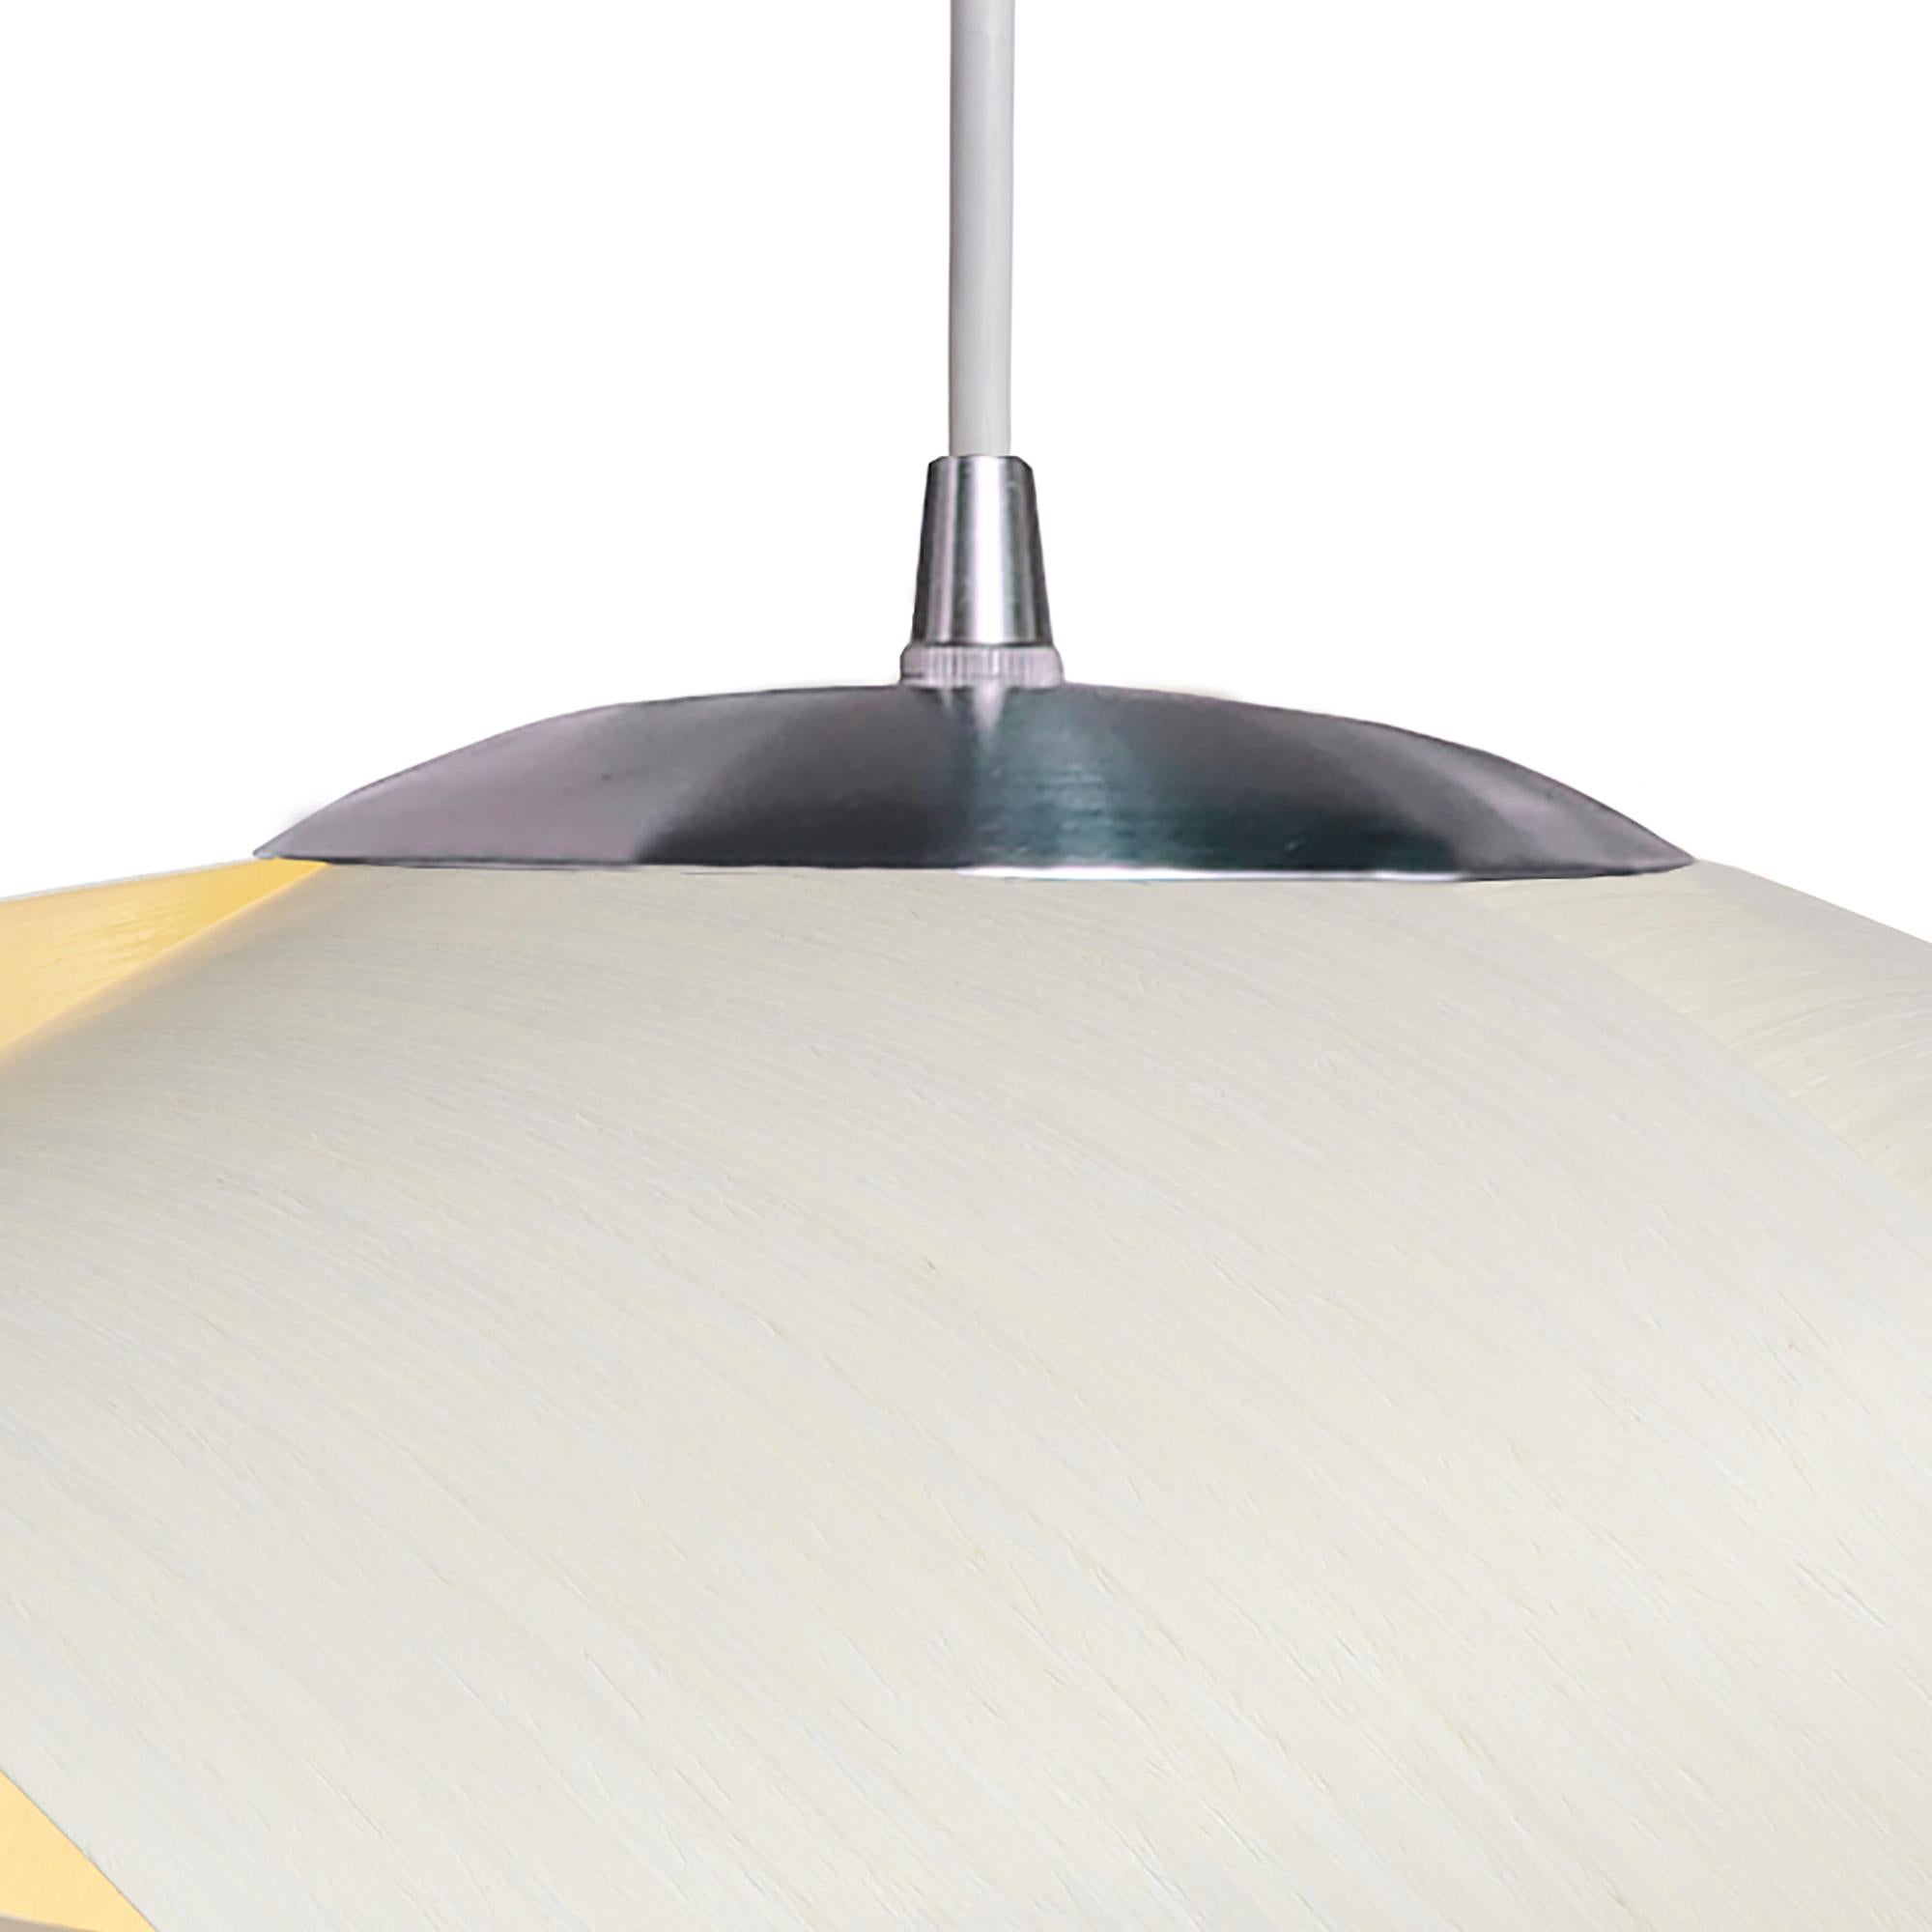 PETAL, featuring brushed steel hardware, is a contemporary Mid-Century Modern light fixture. A Danish Modern piece with wood veneer and a brushed steel accent. This is a minimalist luxury pendant design which can be exhibited in conference rooms,